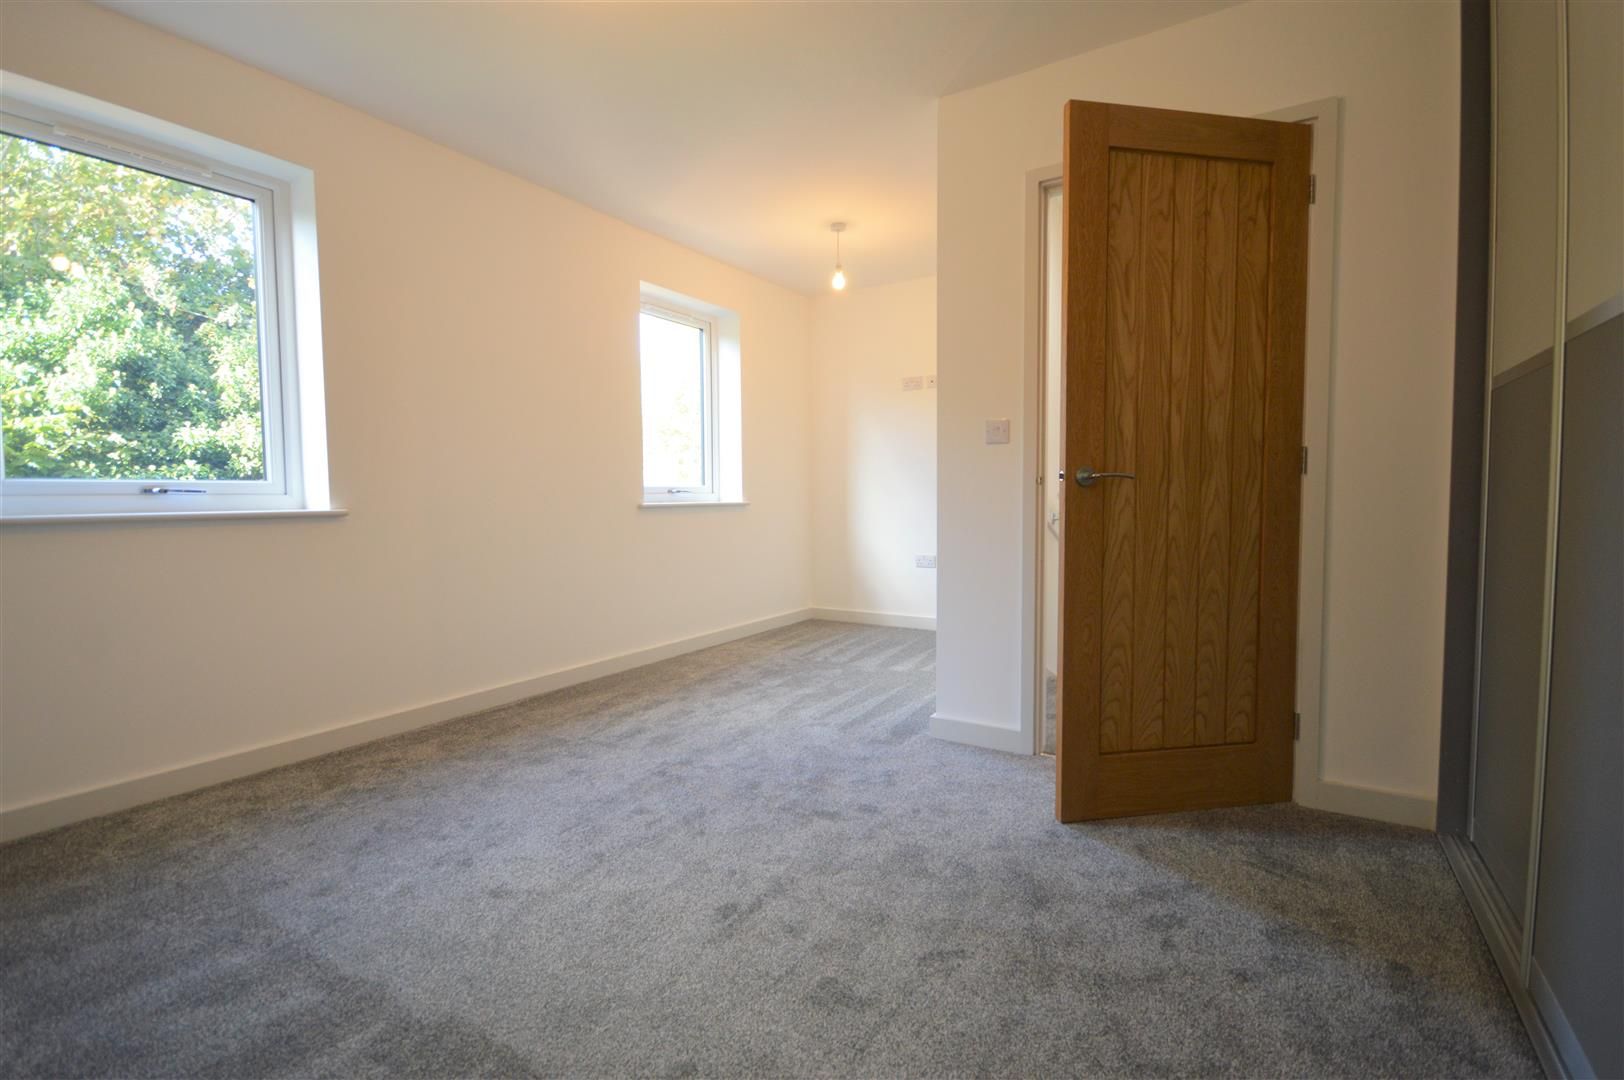 2 bed terraced for sale in Leominster 10